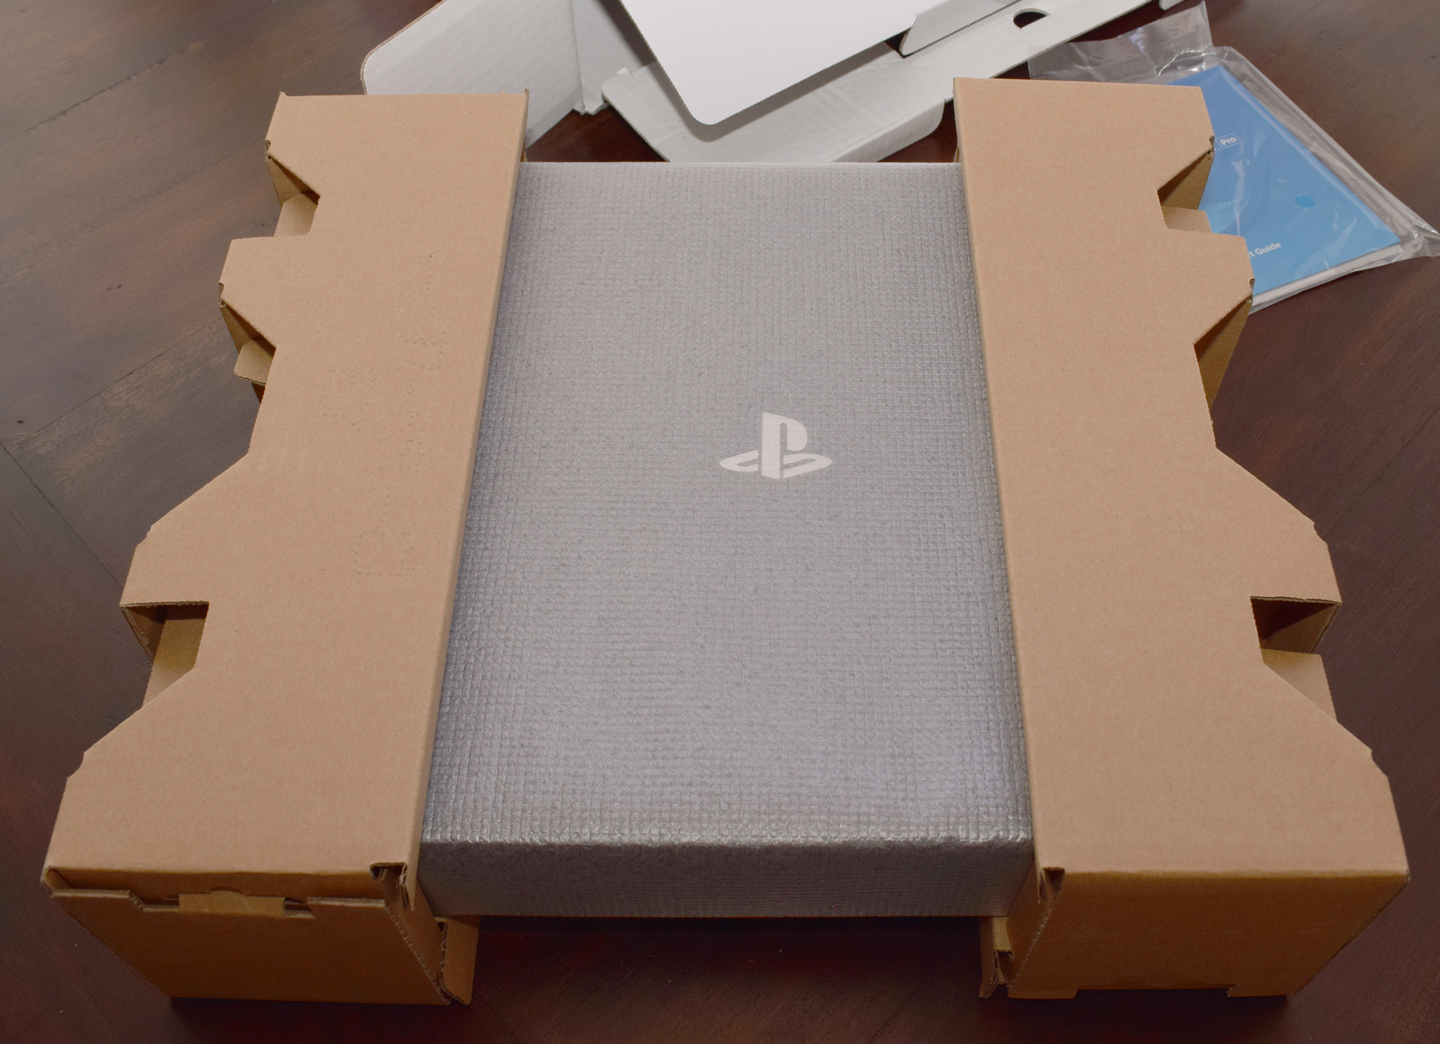 PS4 Pro Unboxing - Console in cardboard frame